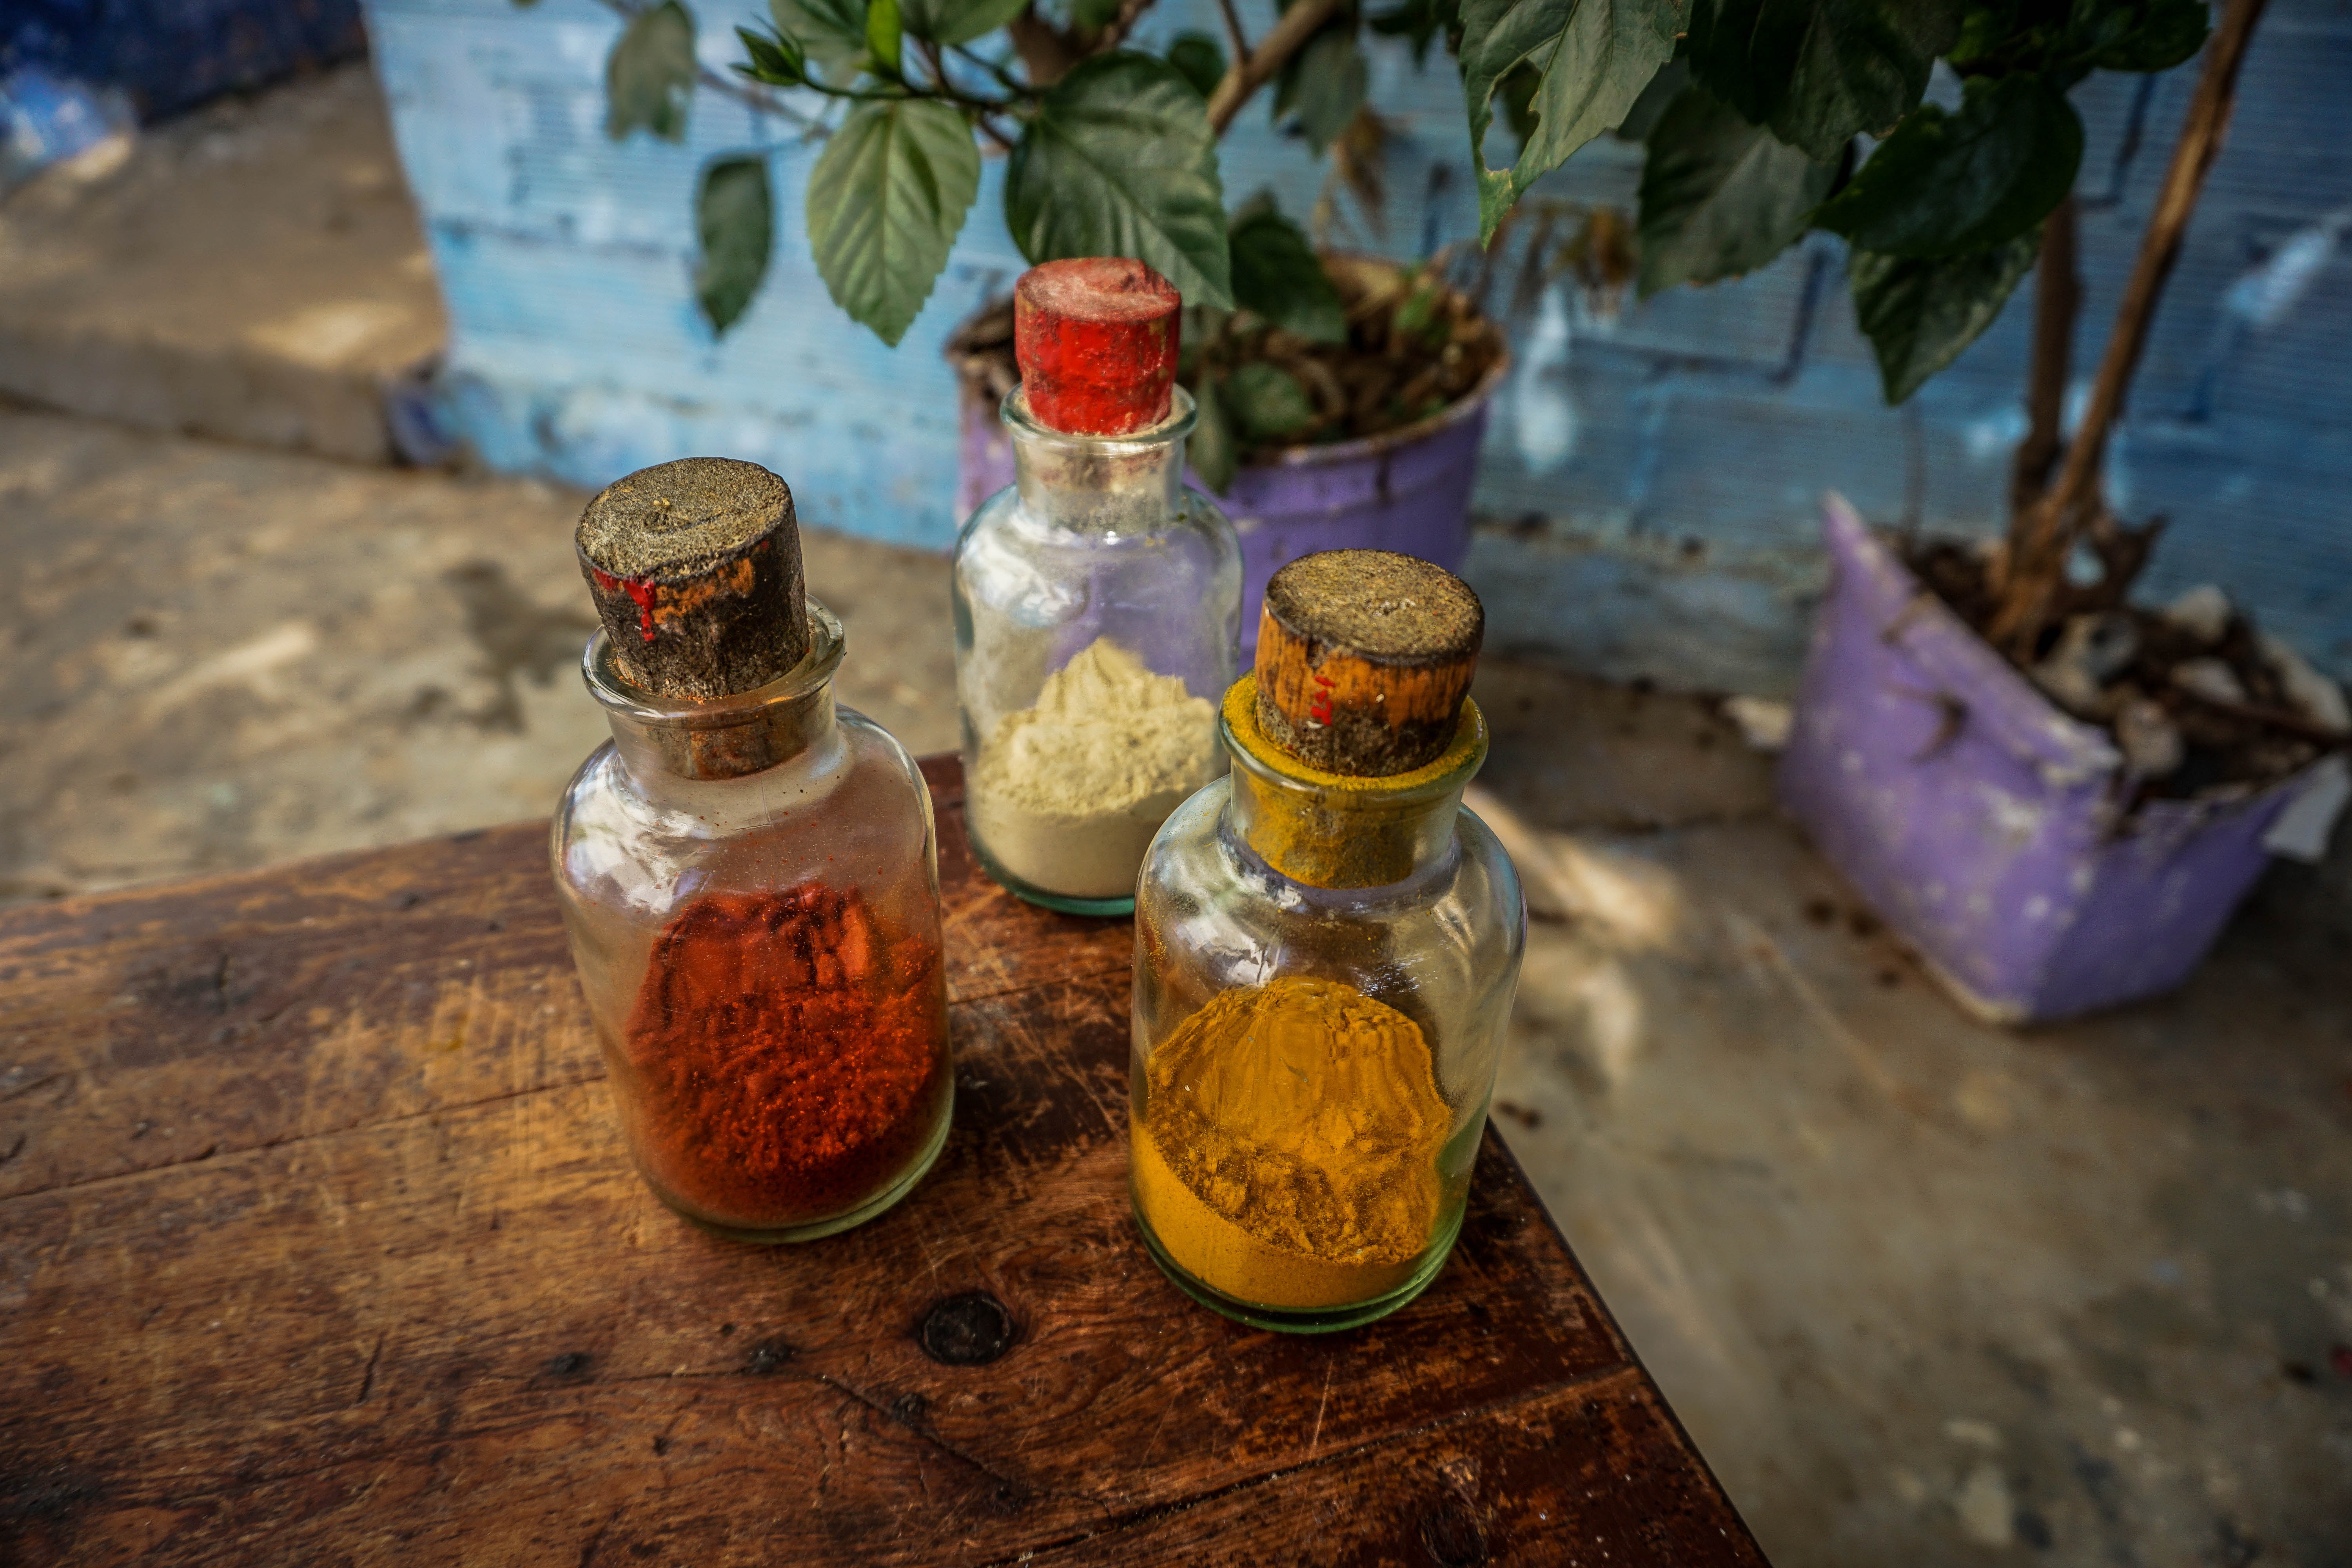 The Most-Used Herbs & Spices in Caribbean Cuisine